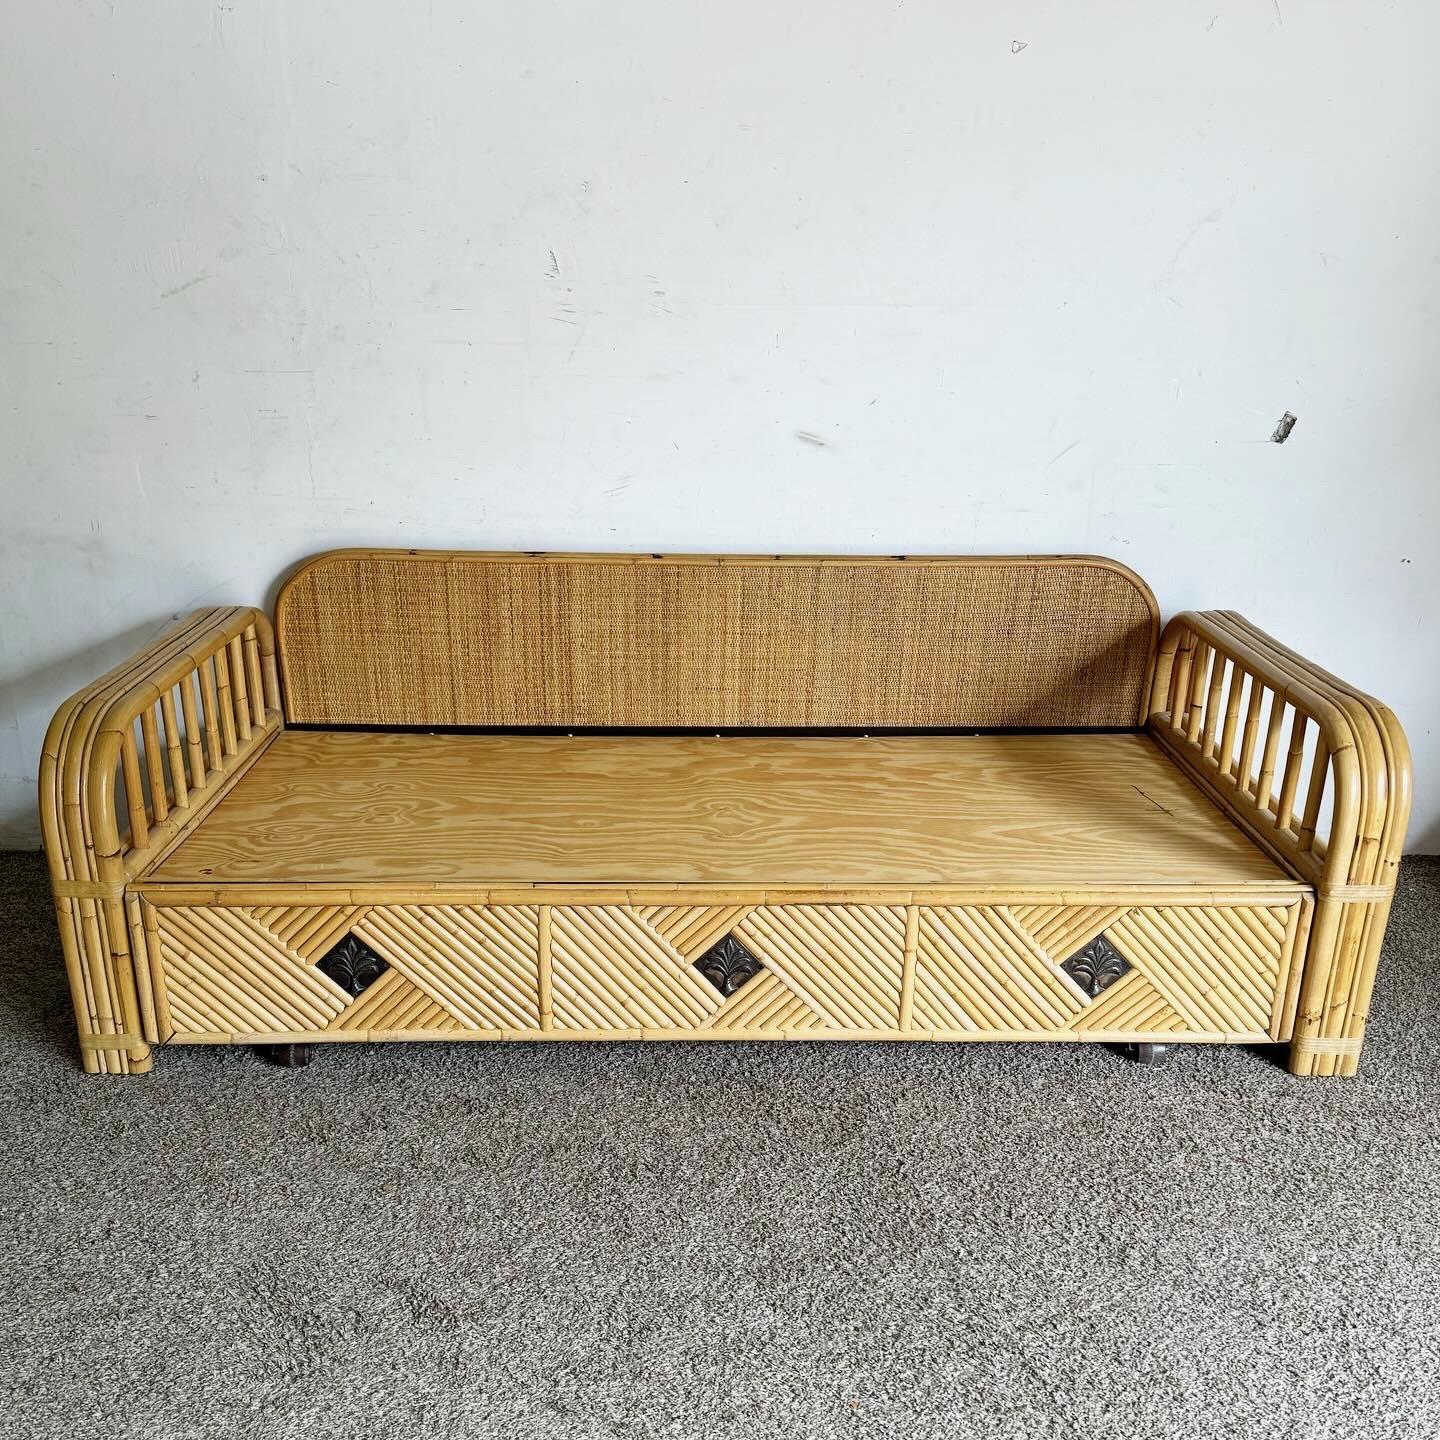 Boho Chic Bamboo Rattan Day Bed With Pull Out Trundle 2